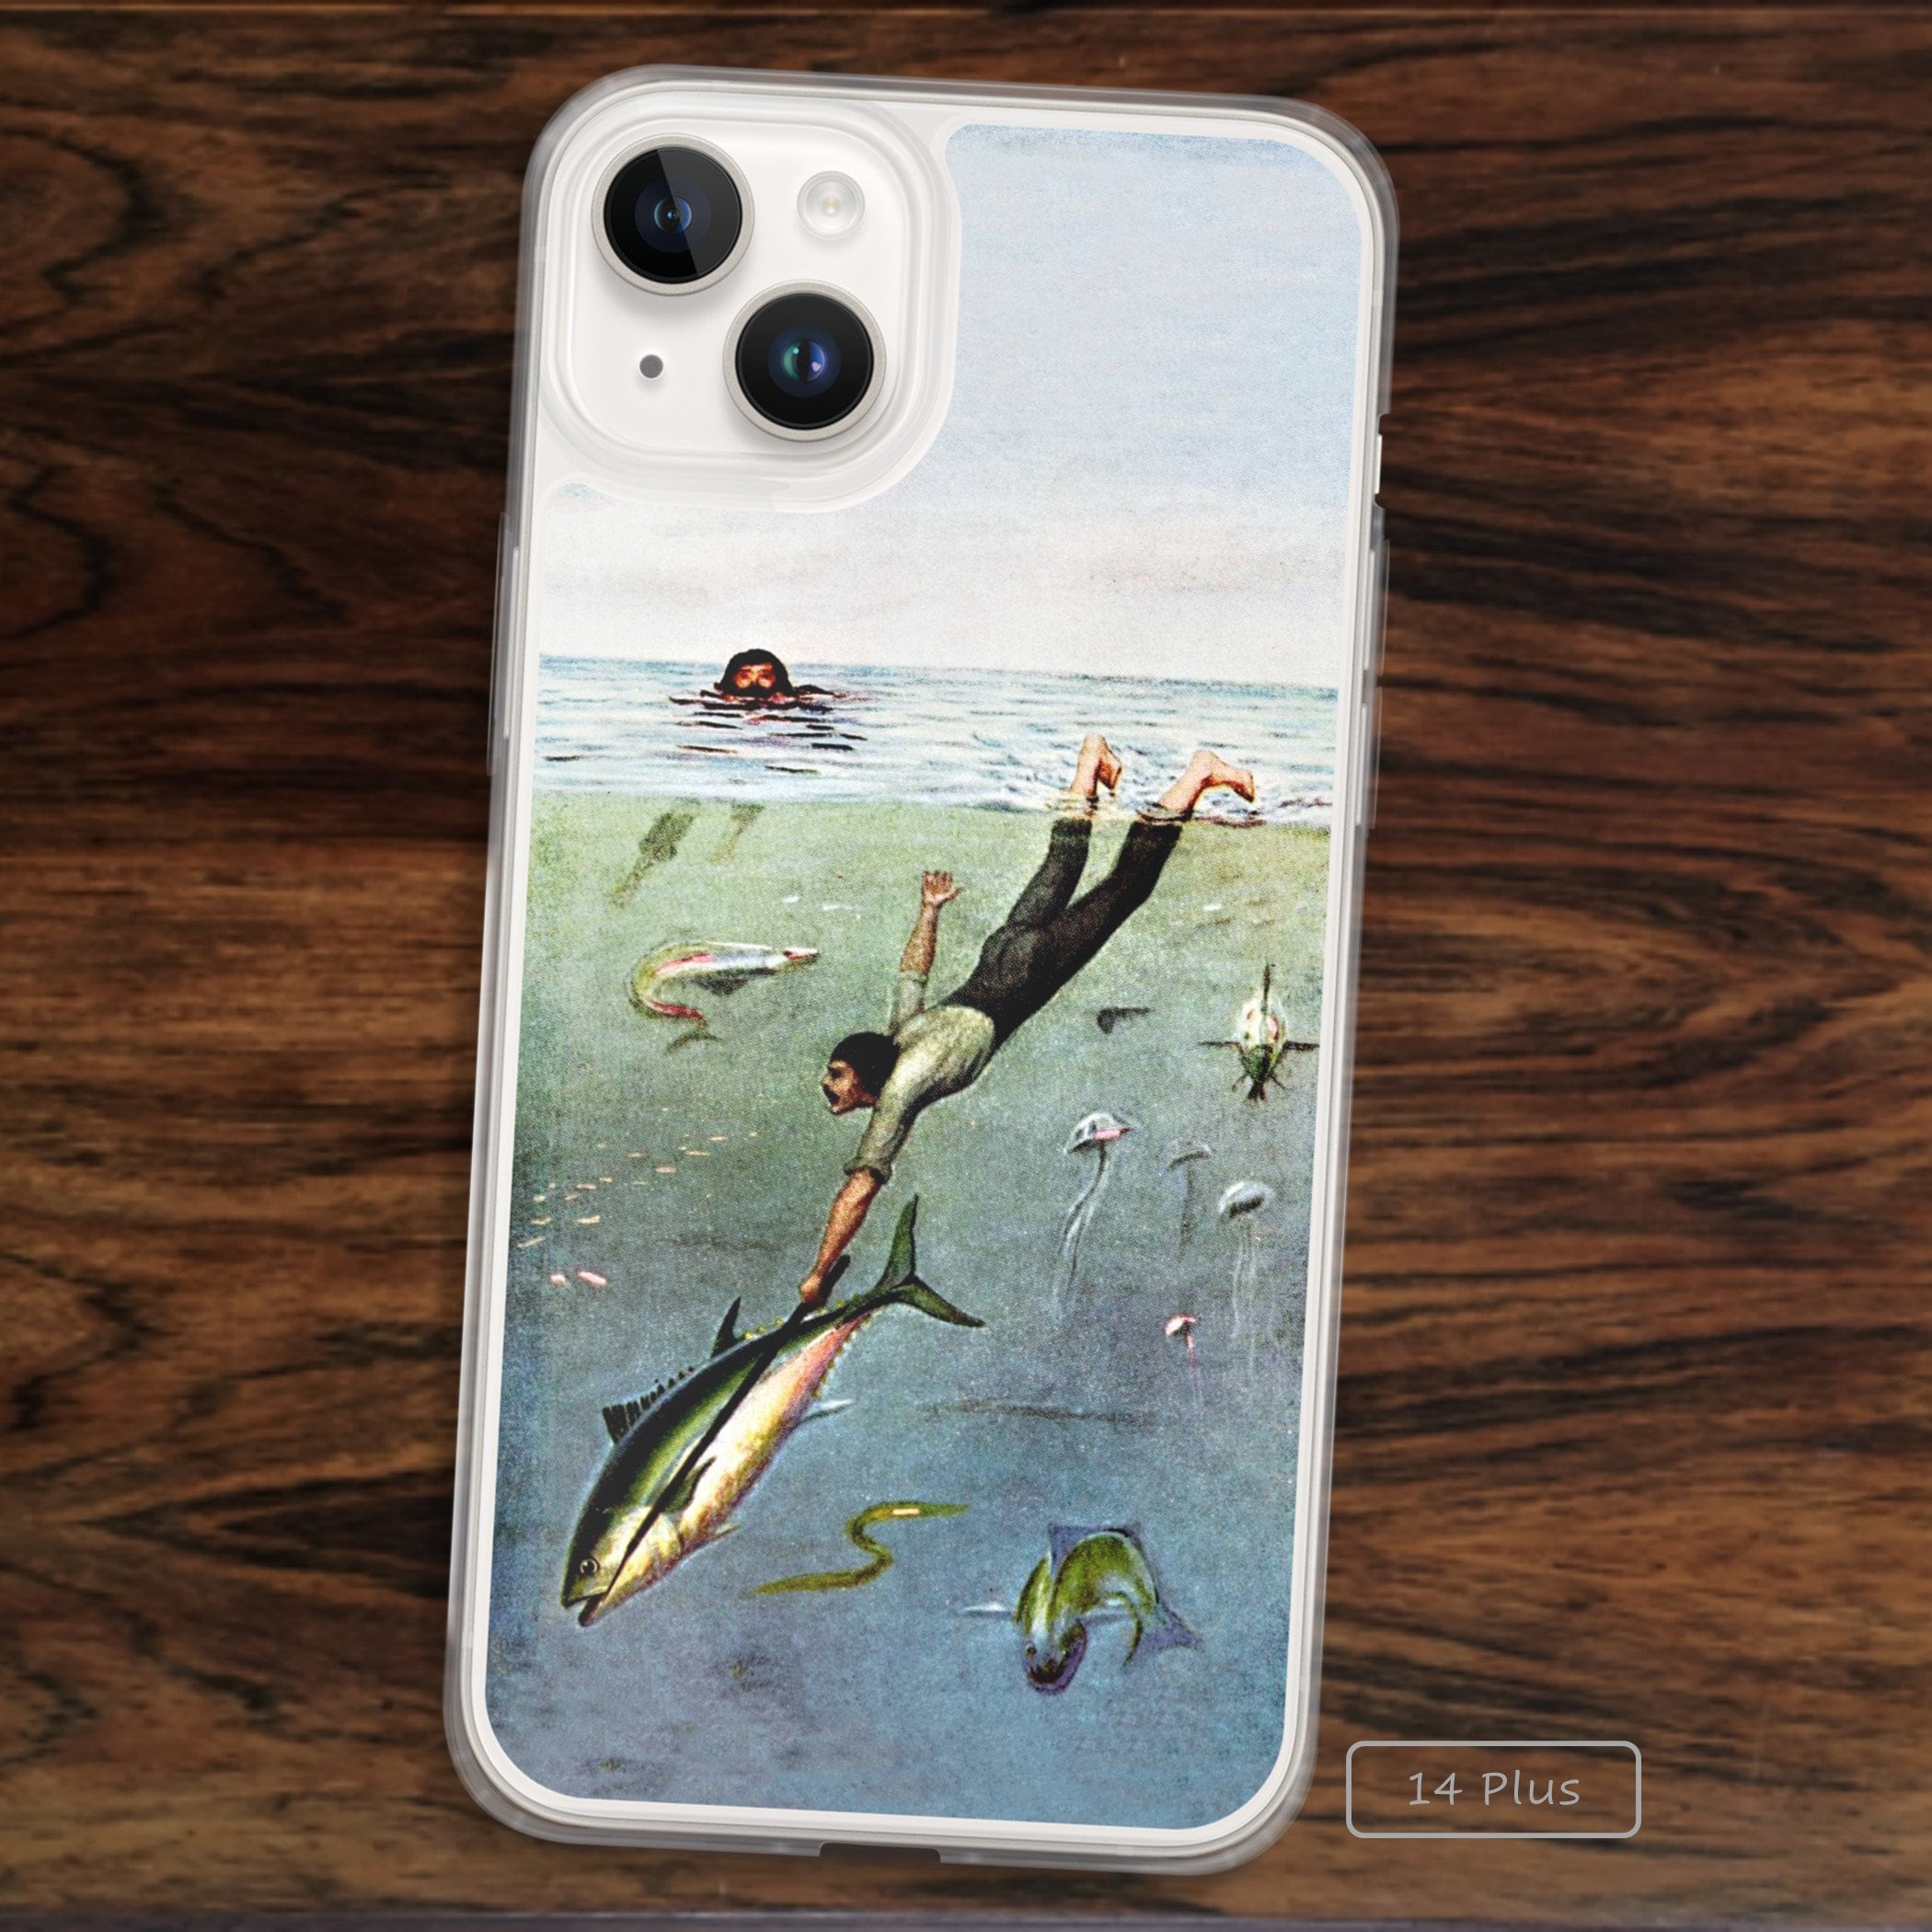 Quirky iPhone Case With Unusual Ocean Drawing of Man Fishing and Fish  Winning 